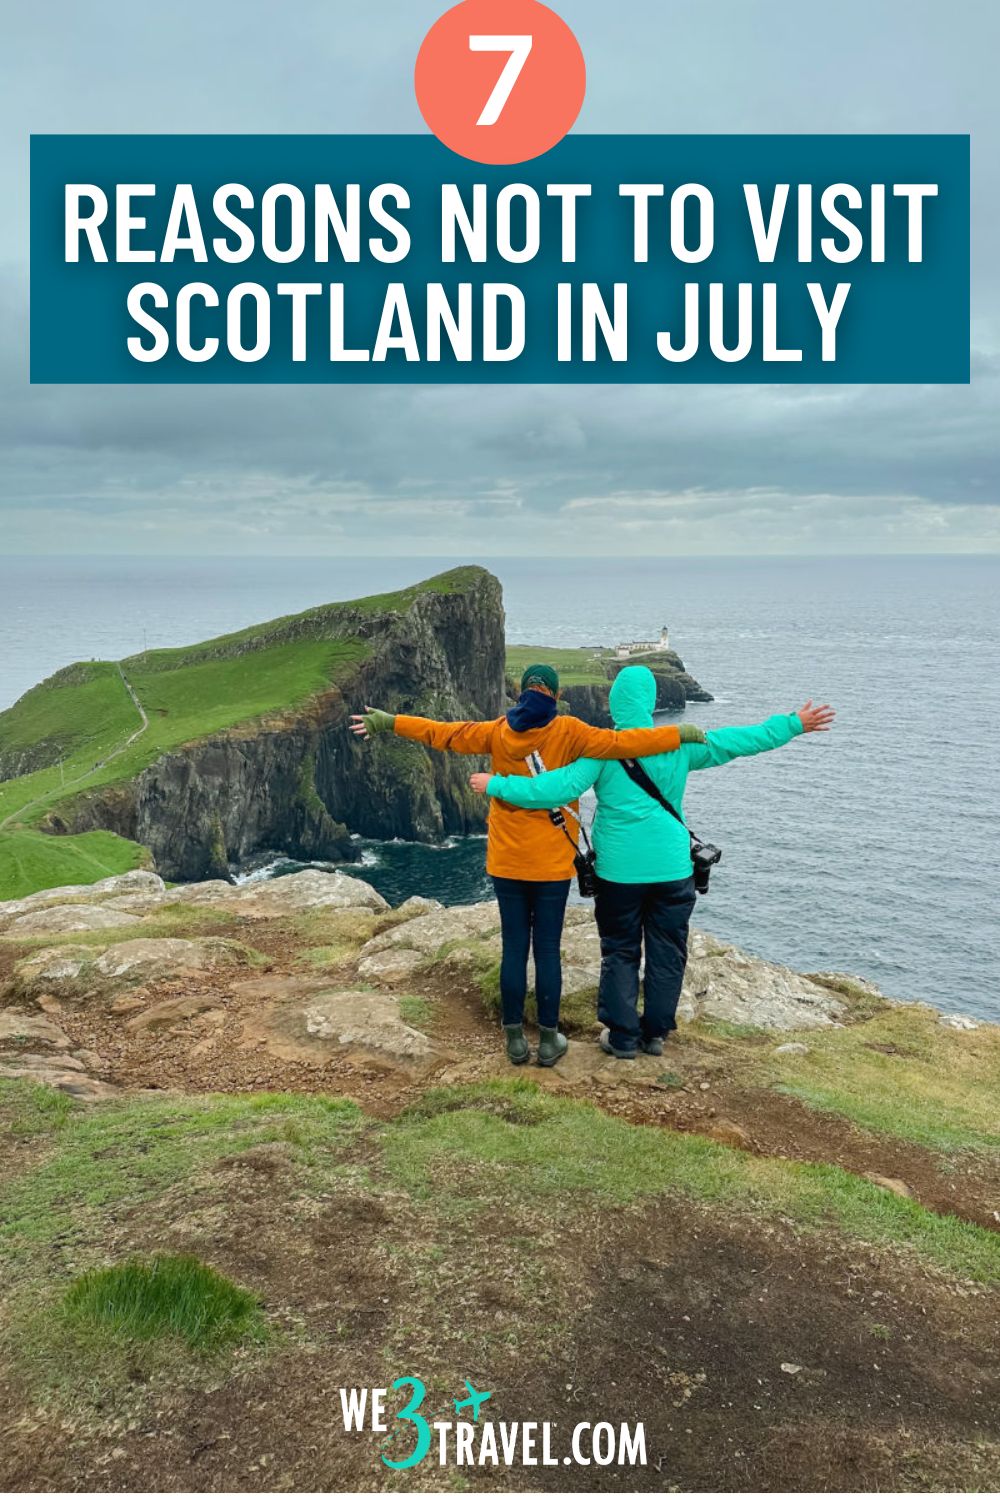 Thinking of visiting Scotland in July? Make sure you read this first before you take your Scotland summer vacation.